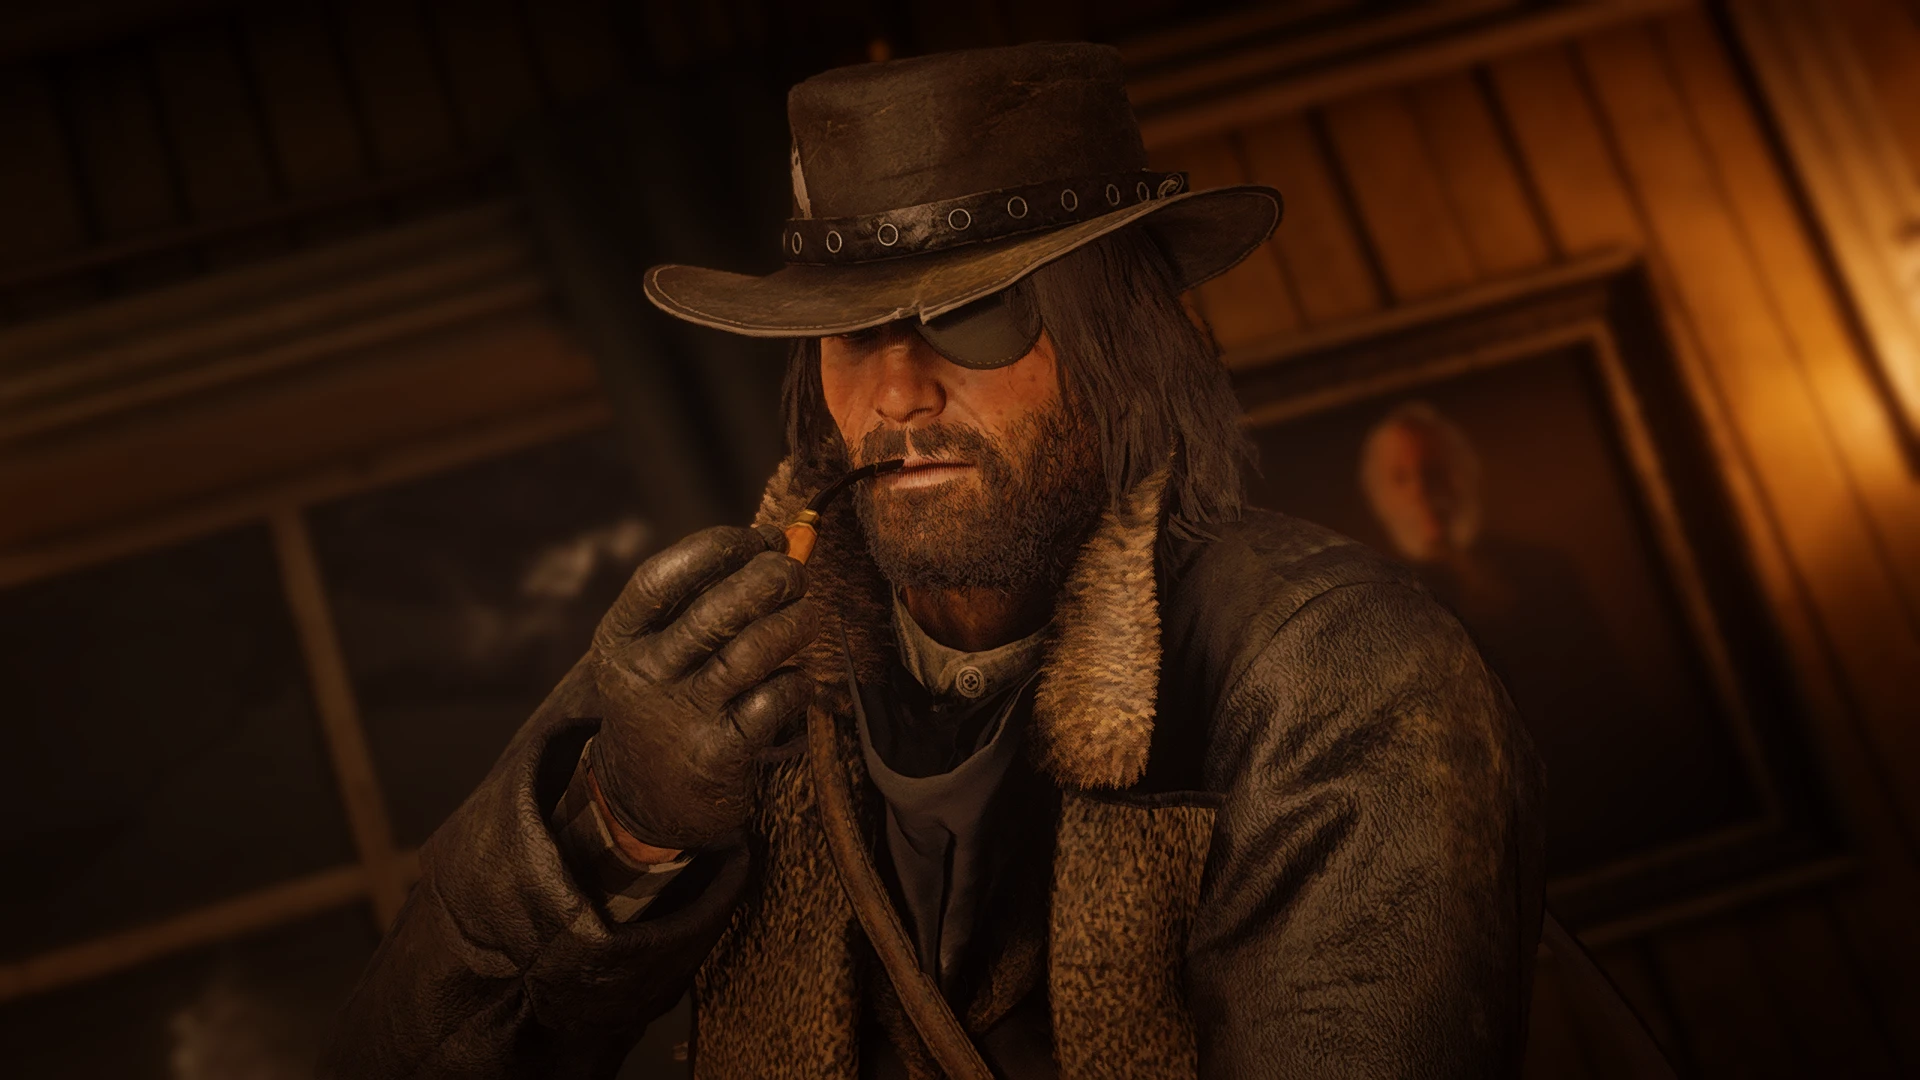 Enjoying pipe at Red Dead Redemption 2 Nexus - Mods community